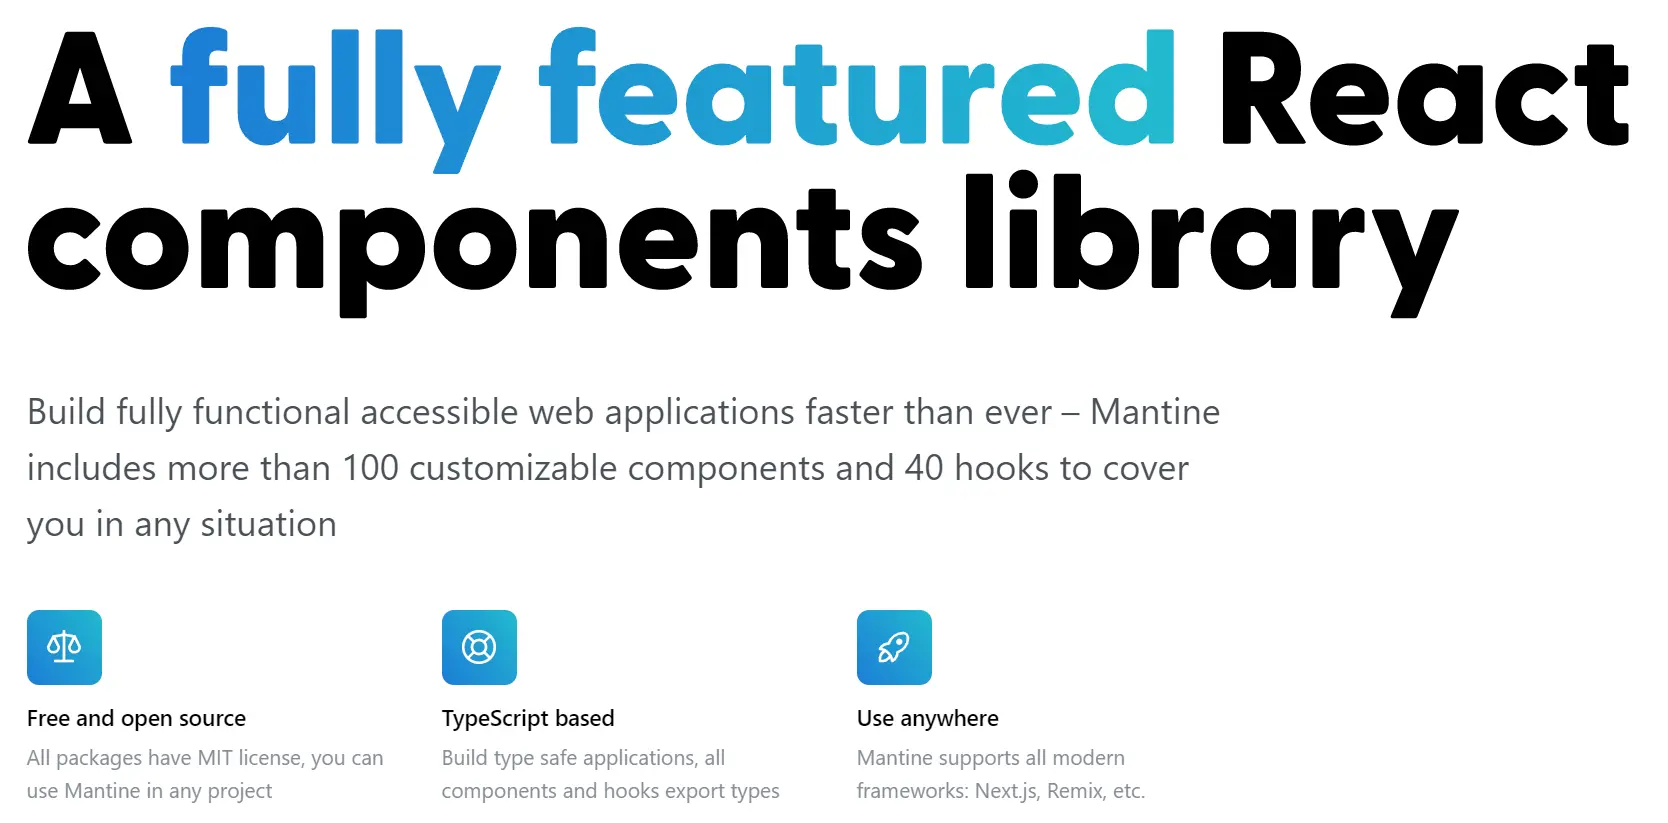 Screenshot of react component library mantine.dev homepage showing its features.